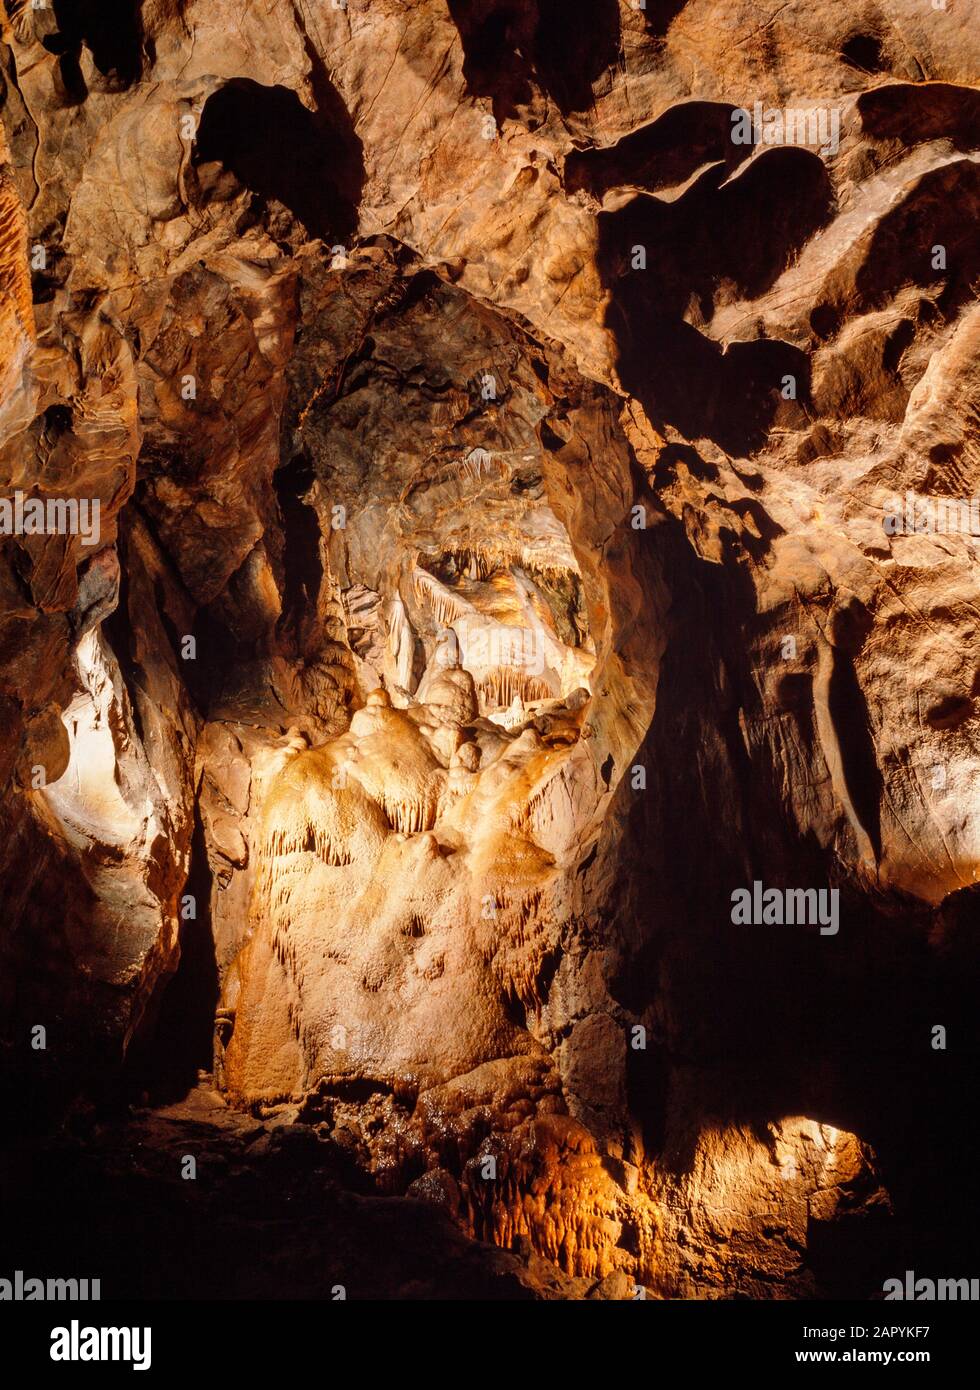 Underground limestone cave formations, Mendip Hills, Somerset, UK. Stalactites growing down, stalagmites are growing up. Stock Photo